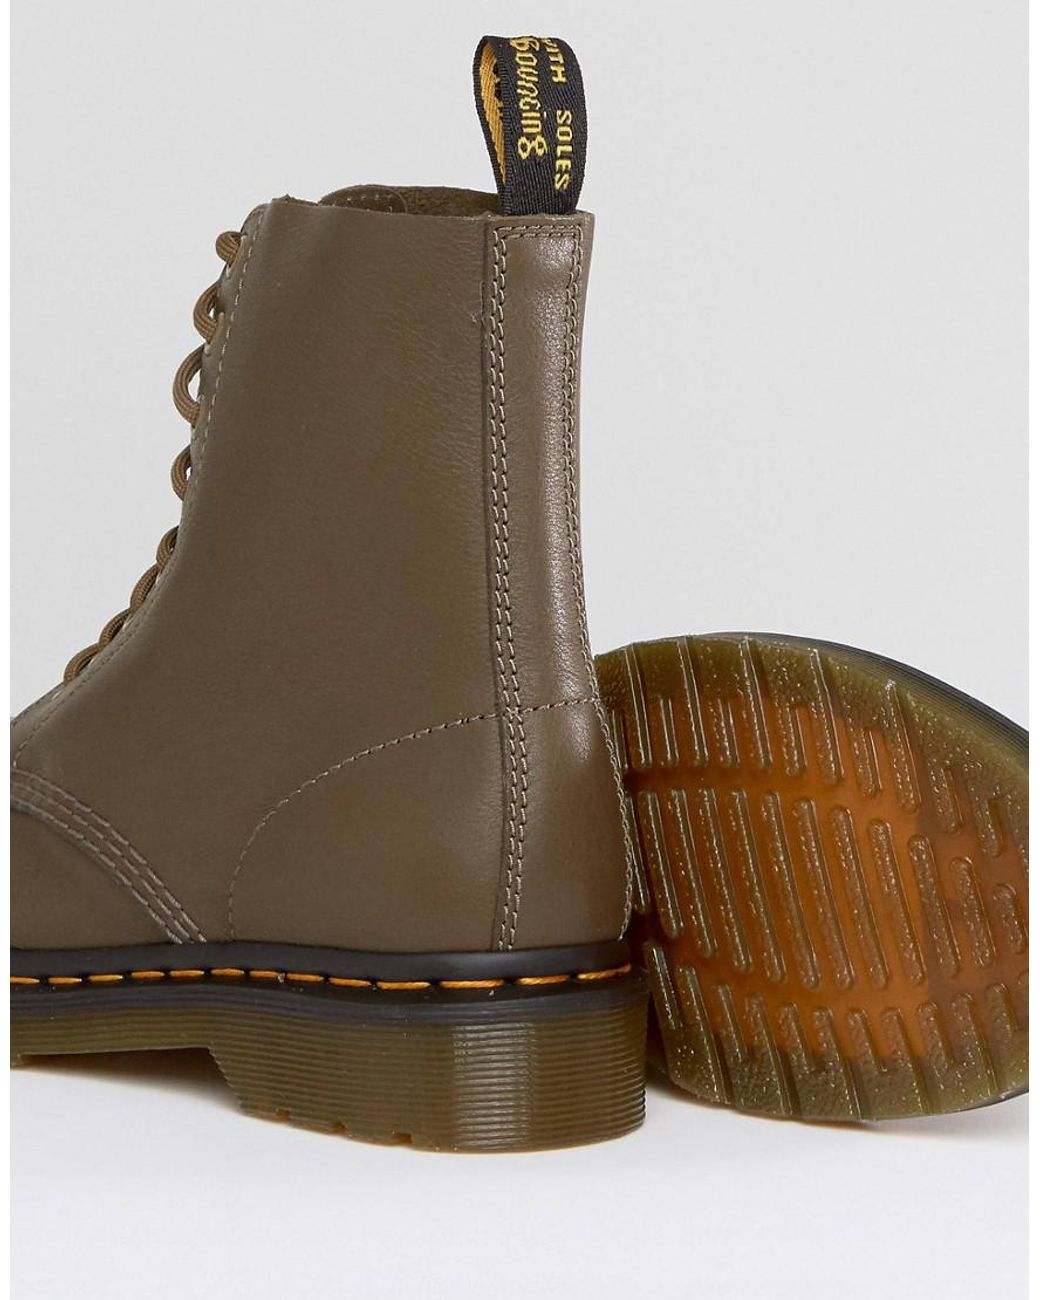 Dr. Martens Leather Pascal Khaki 8 Eye Boots in Green | Lyst Australia